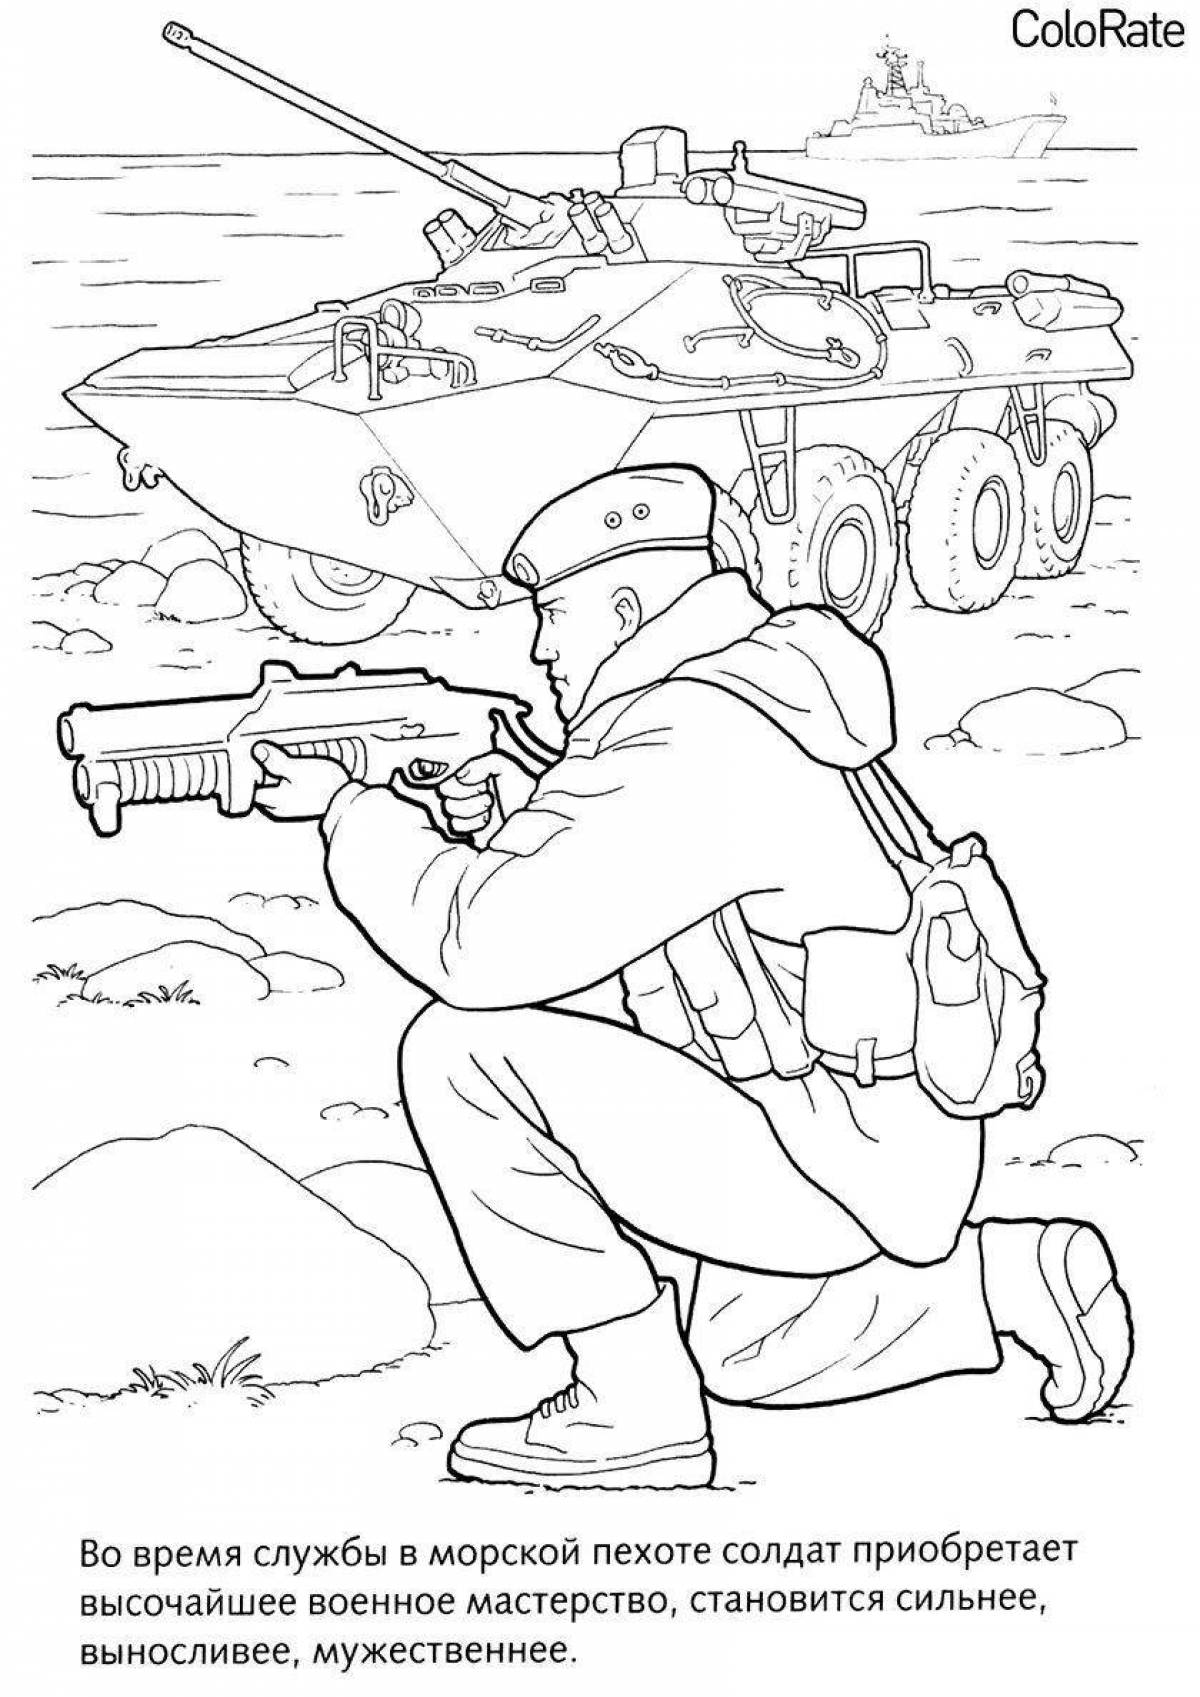 Fascinating military coloring book for 6-7 year olds